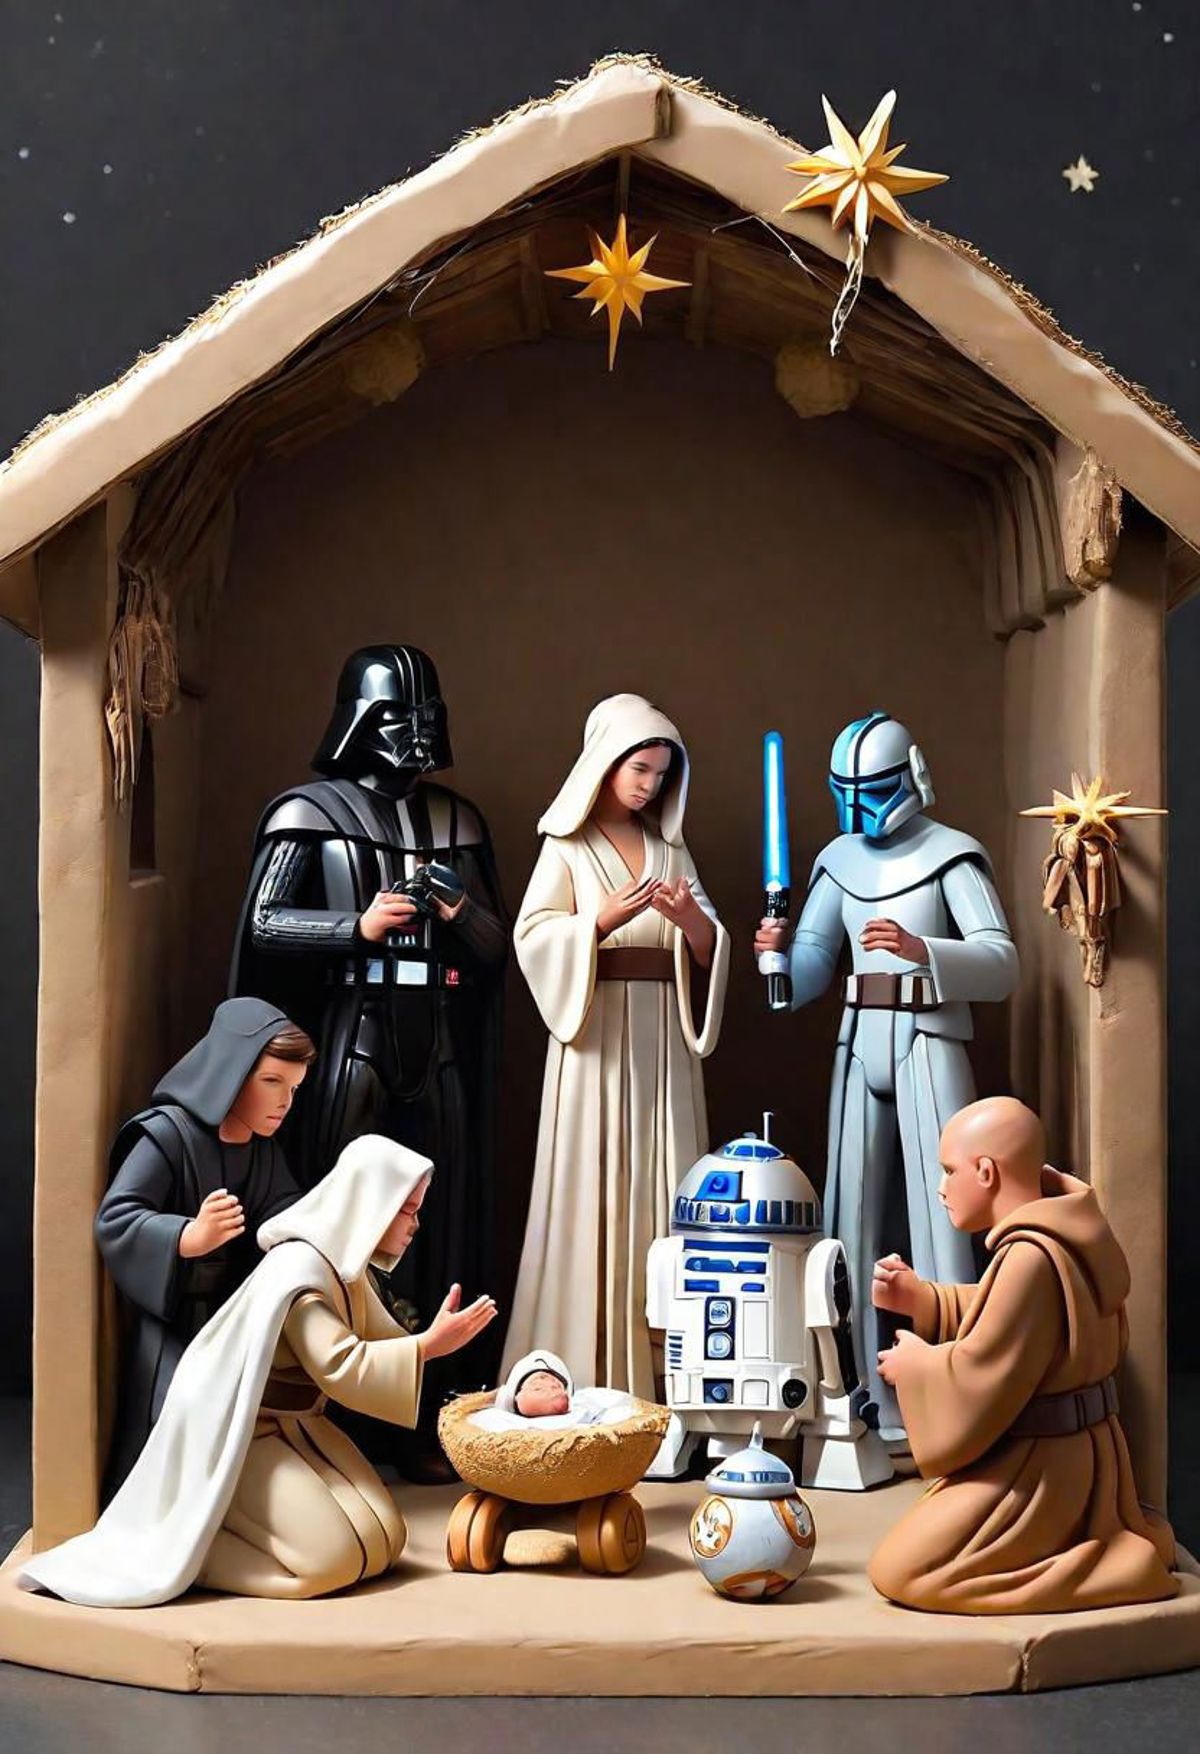 Nativity Scene with Star Wars Characters: Darth Vader, Stormtrooper, and R2-D2